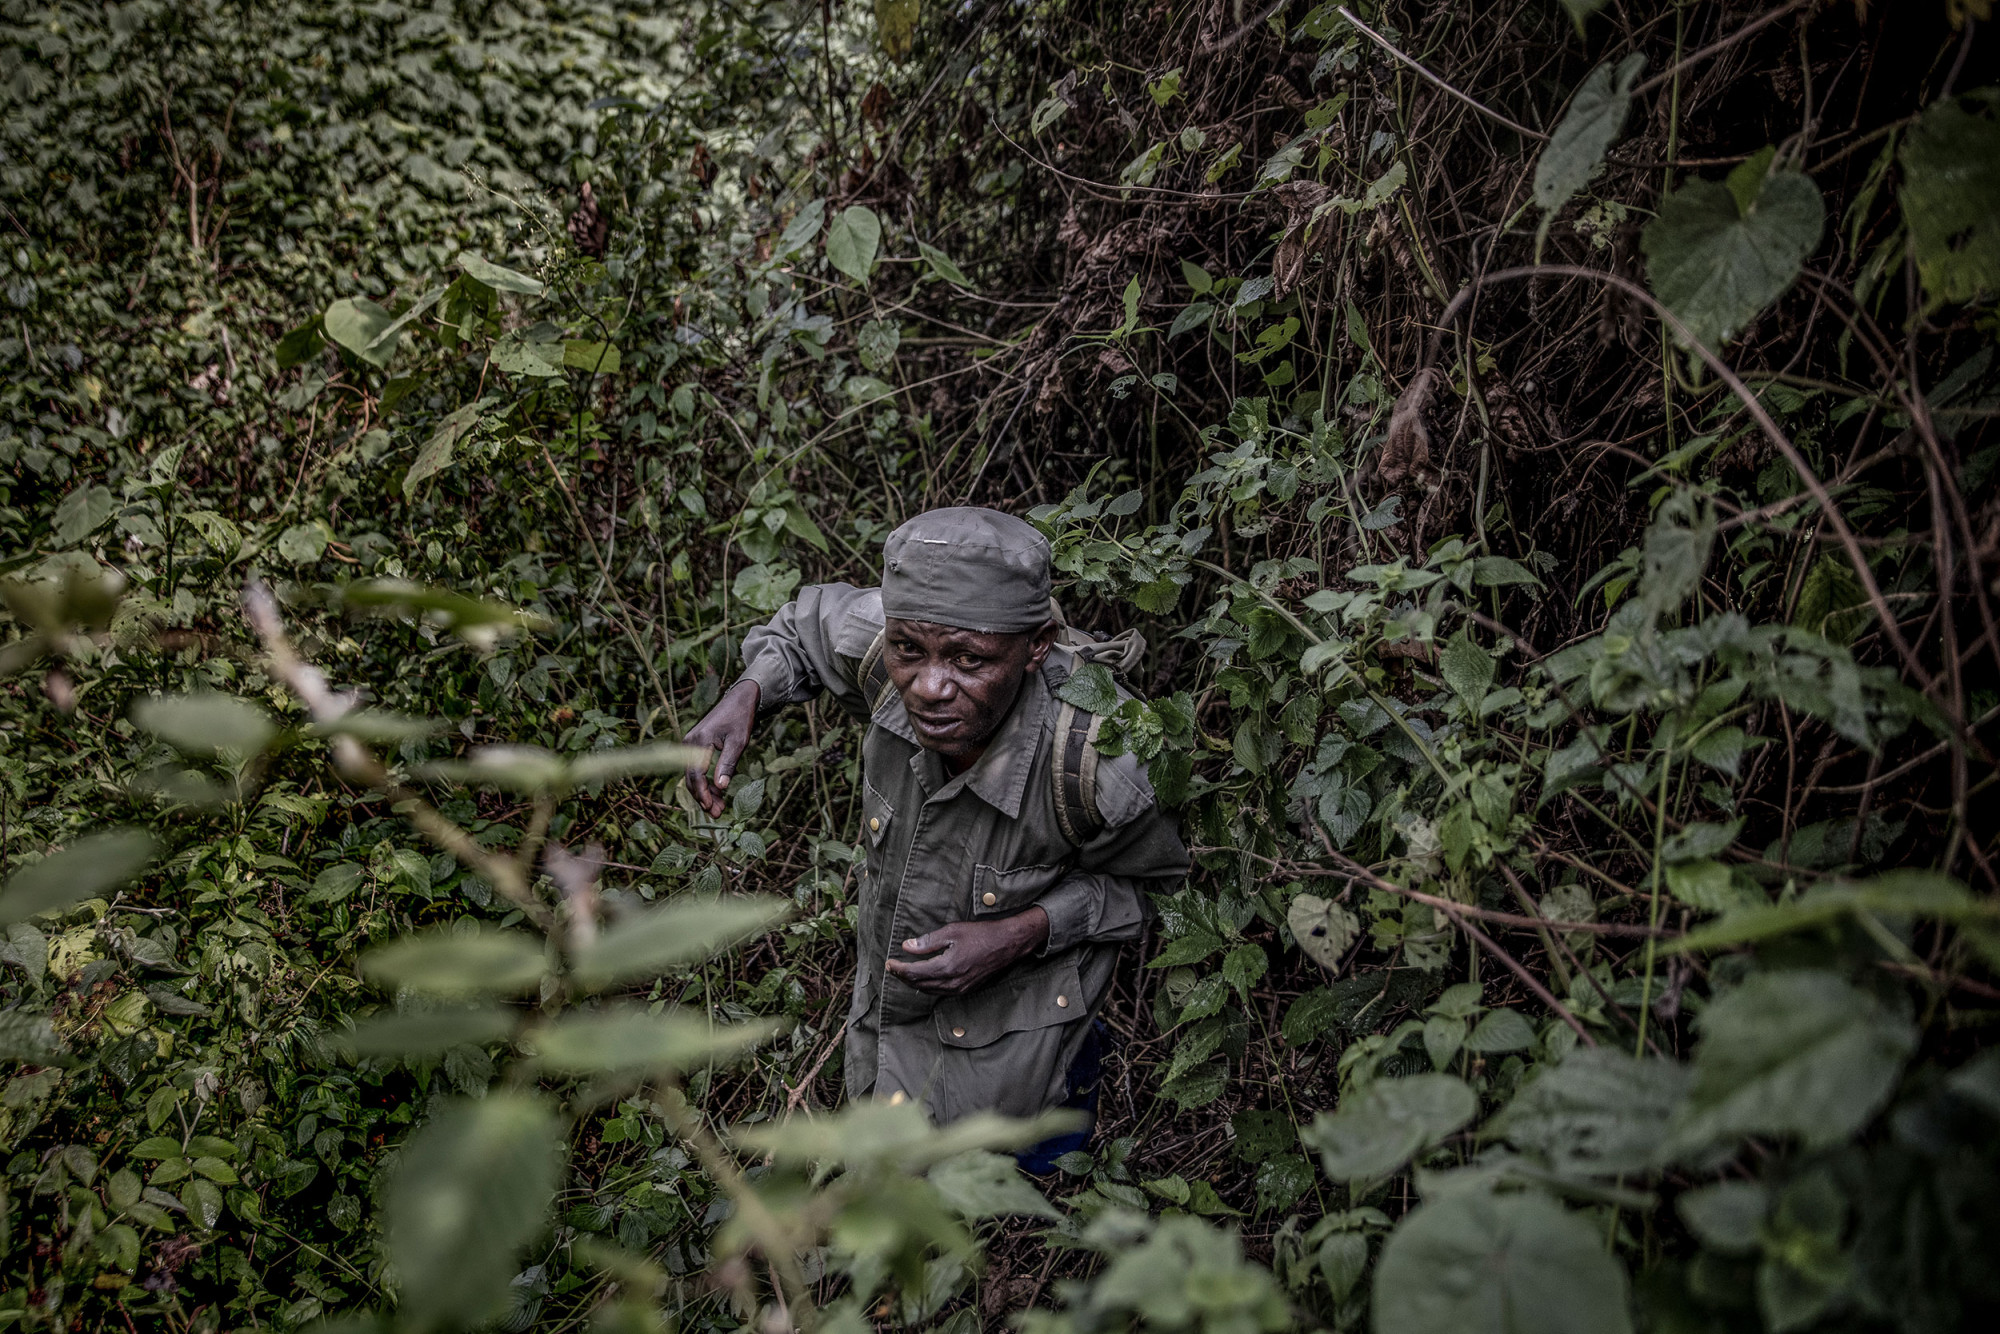 Kahuzi-Biega National Park, South-Kivu Province, September 05, 2021. Kaboyi Machine, 52, walks through the forest to follow the tracks of gorillas to make it easier for tourists to locate them. © Guerchom Ndebo for Fondation Carmignac